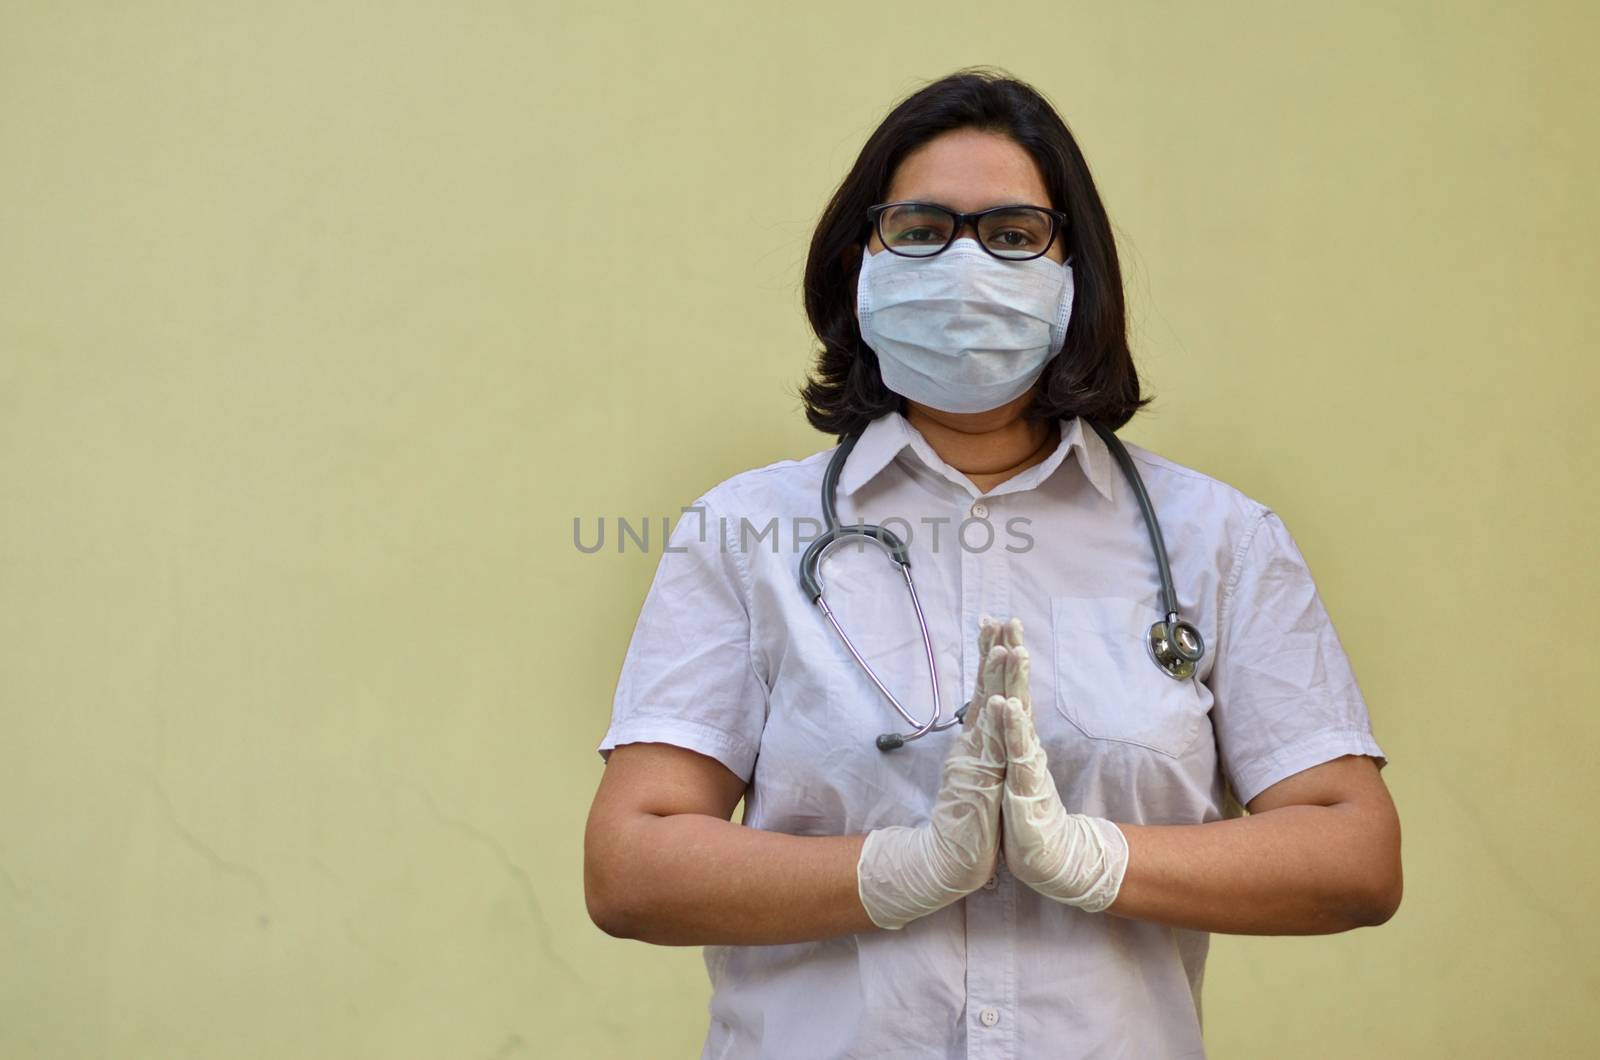 Portrait of young medical healthcare female worker wearing surgical face mask to protect herself from Corona Virus (COVID-19) pandemic against yellow background. Concept : Getting ready to fight